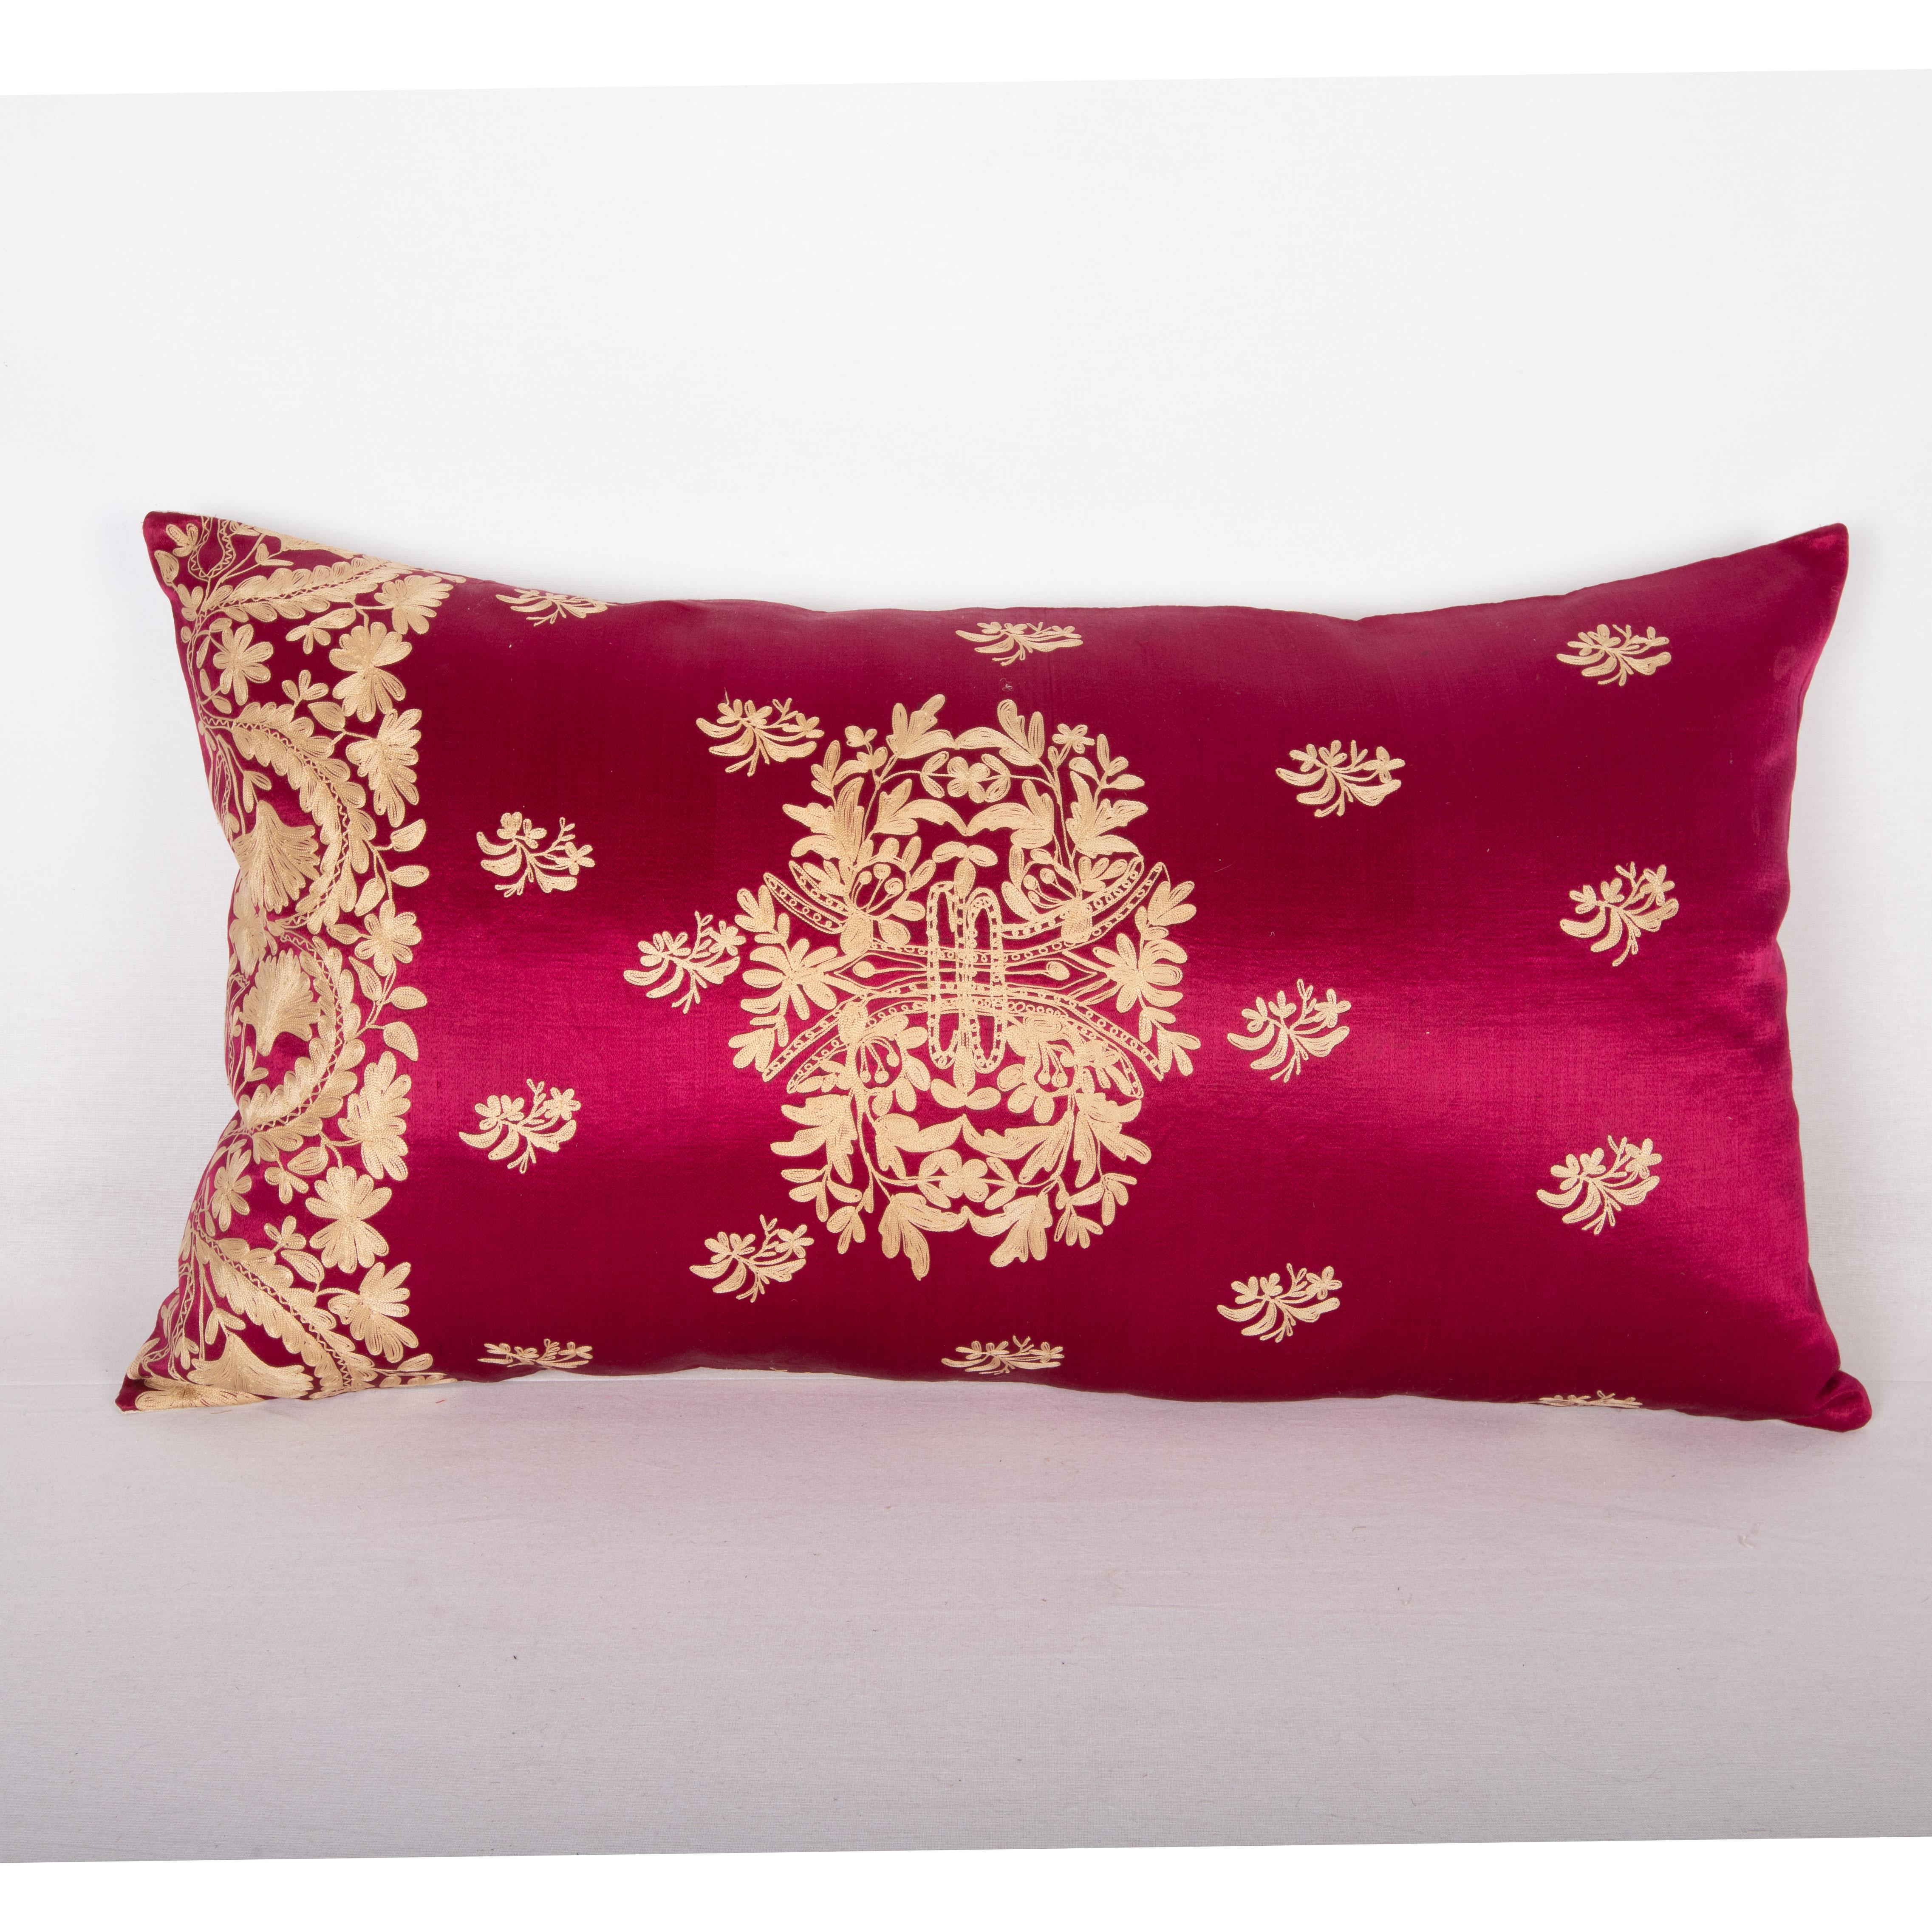 This pillow case is made from an Early 20th C. embroidery from Ottoman Turkey.

It does not come with an insert but a bag made to the size to accommodate insert materials.
Linen in the back.
Zipper closure.
Dry Cleaning is reccommended.